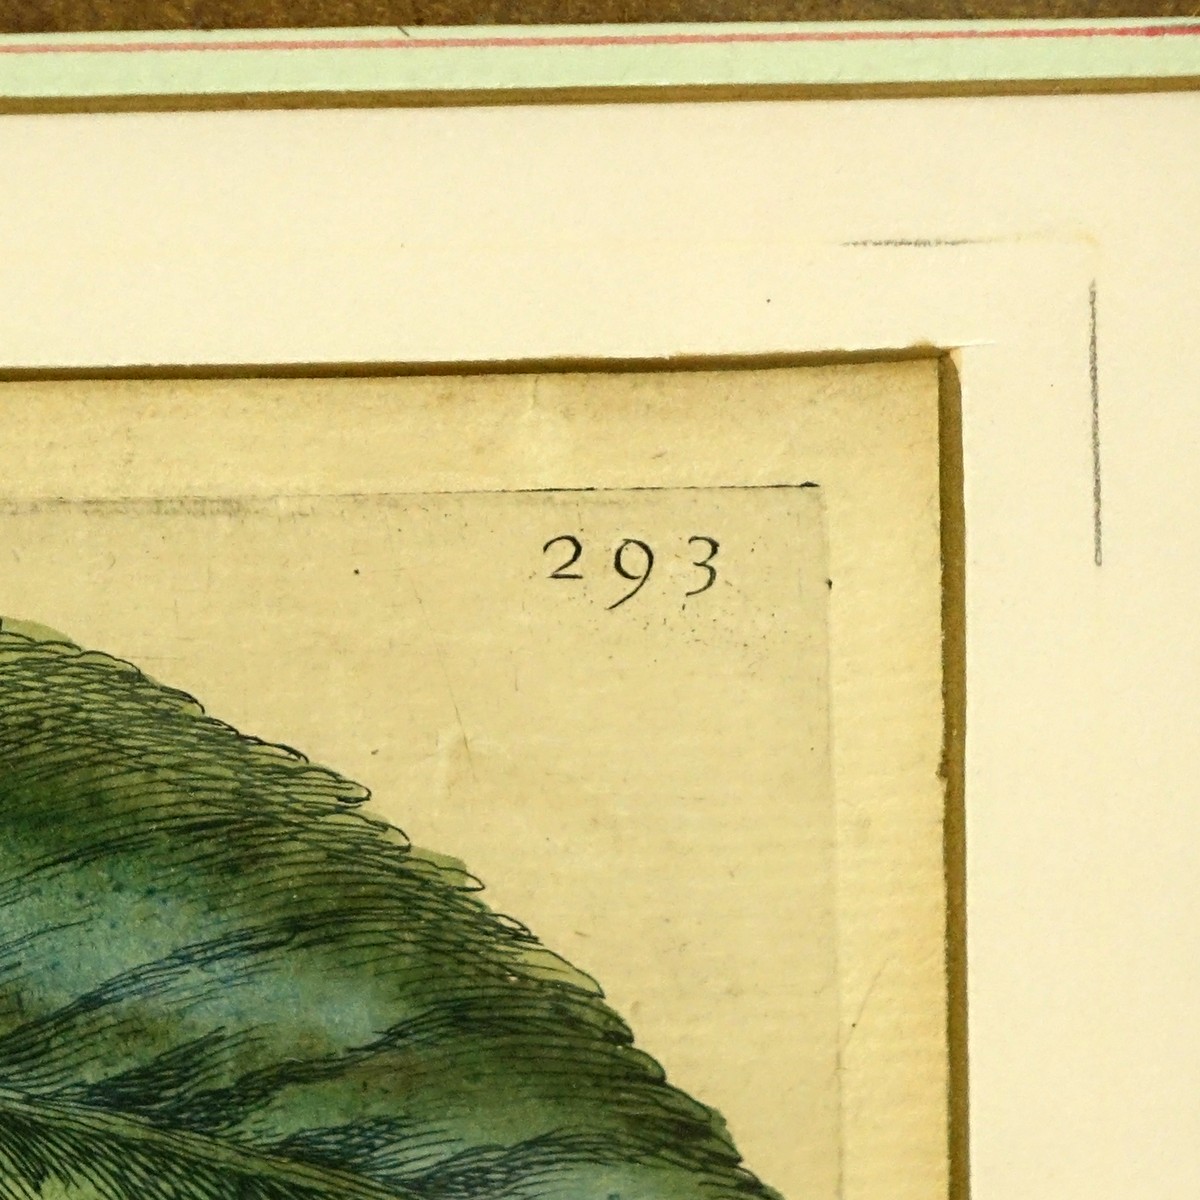 Two 18th Century Hand Colored Botanical Engravings. Unsigned.